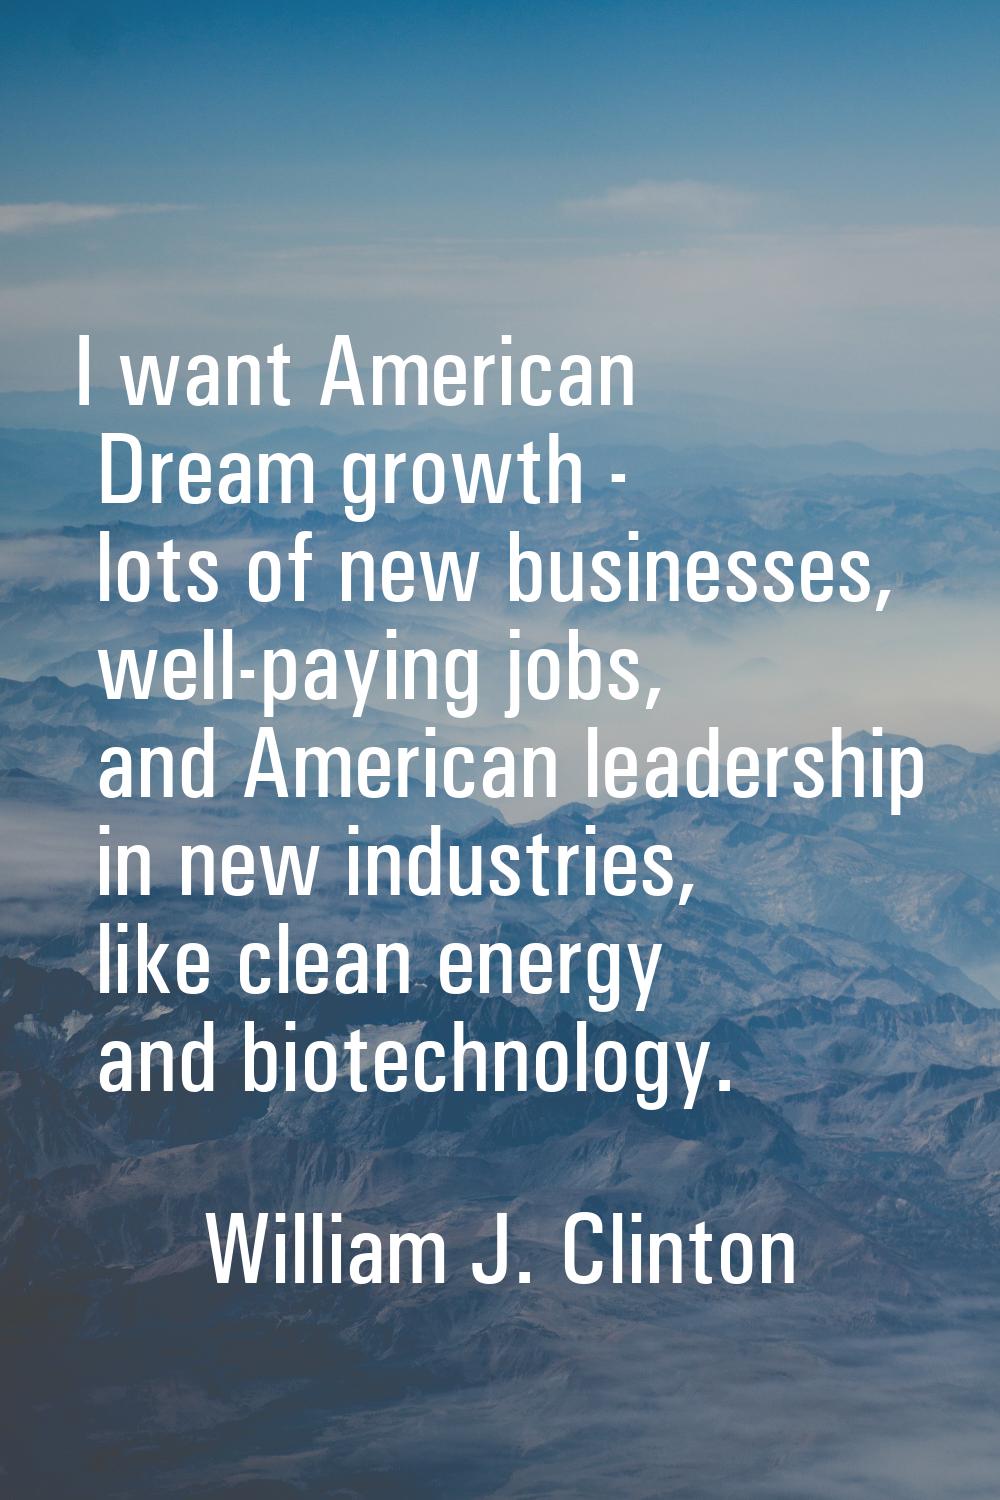 I want American Dream growth - lots of new businesses, well-paying jobs, and American leadership in